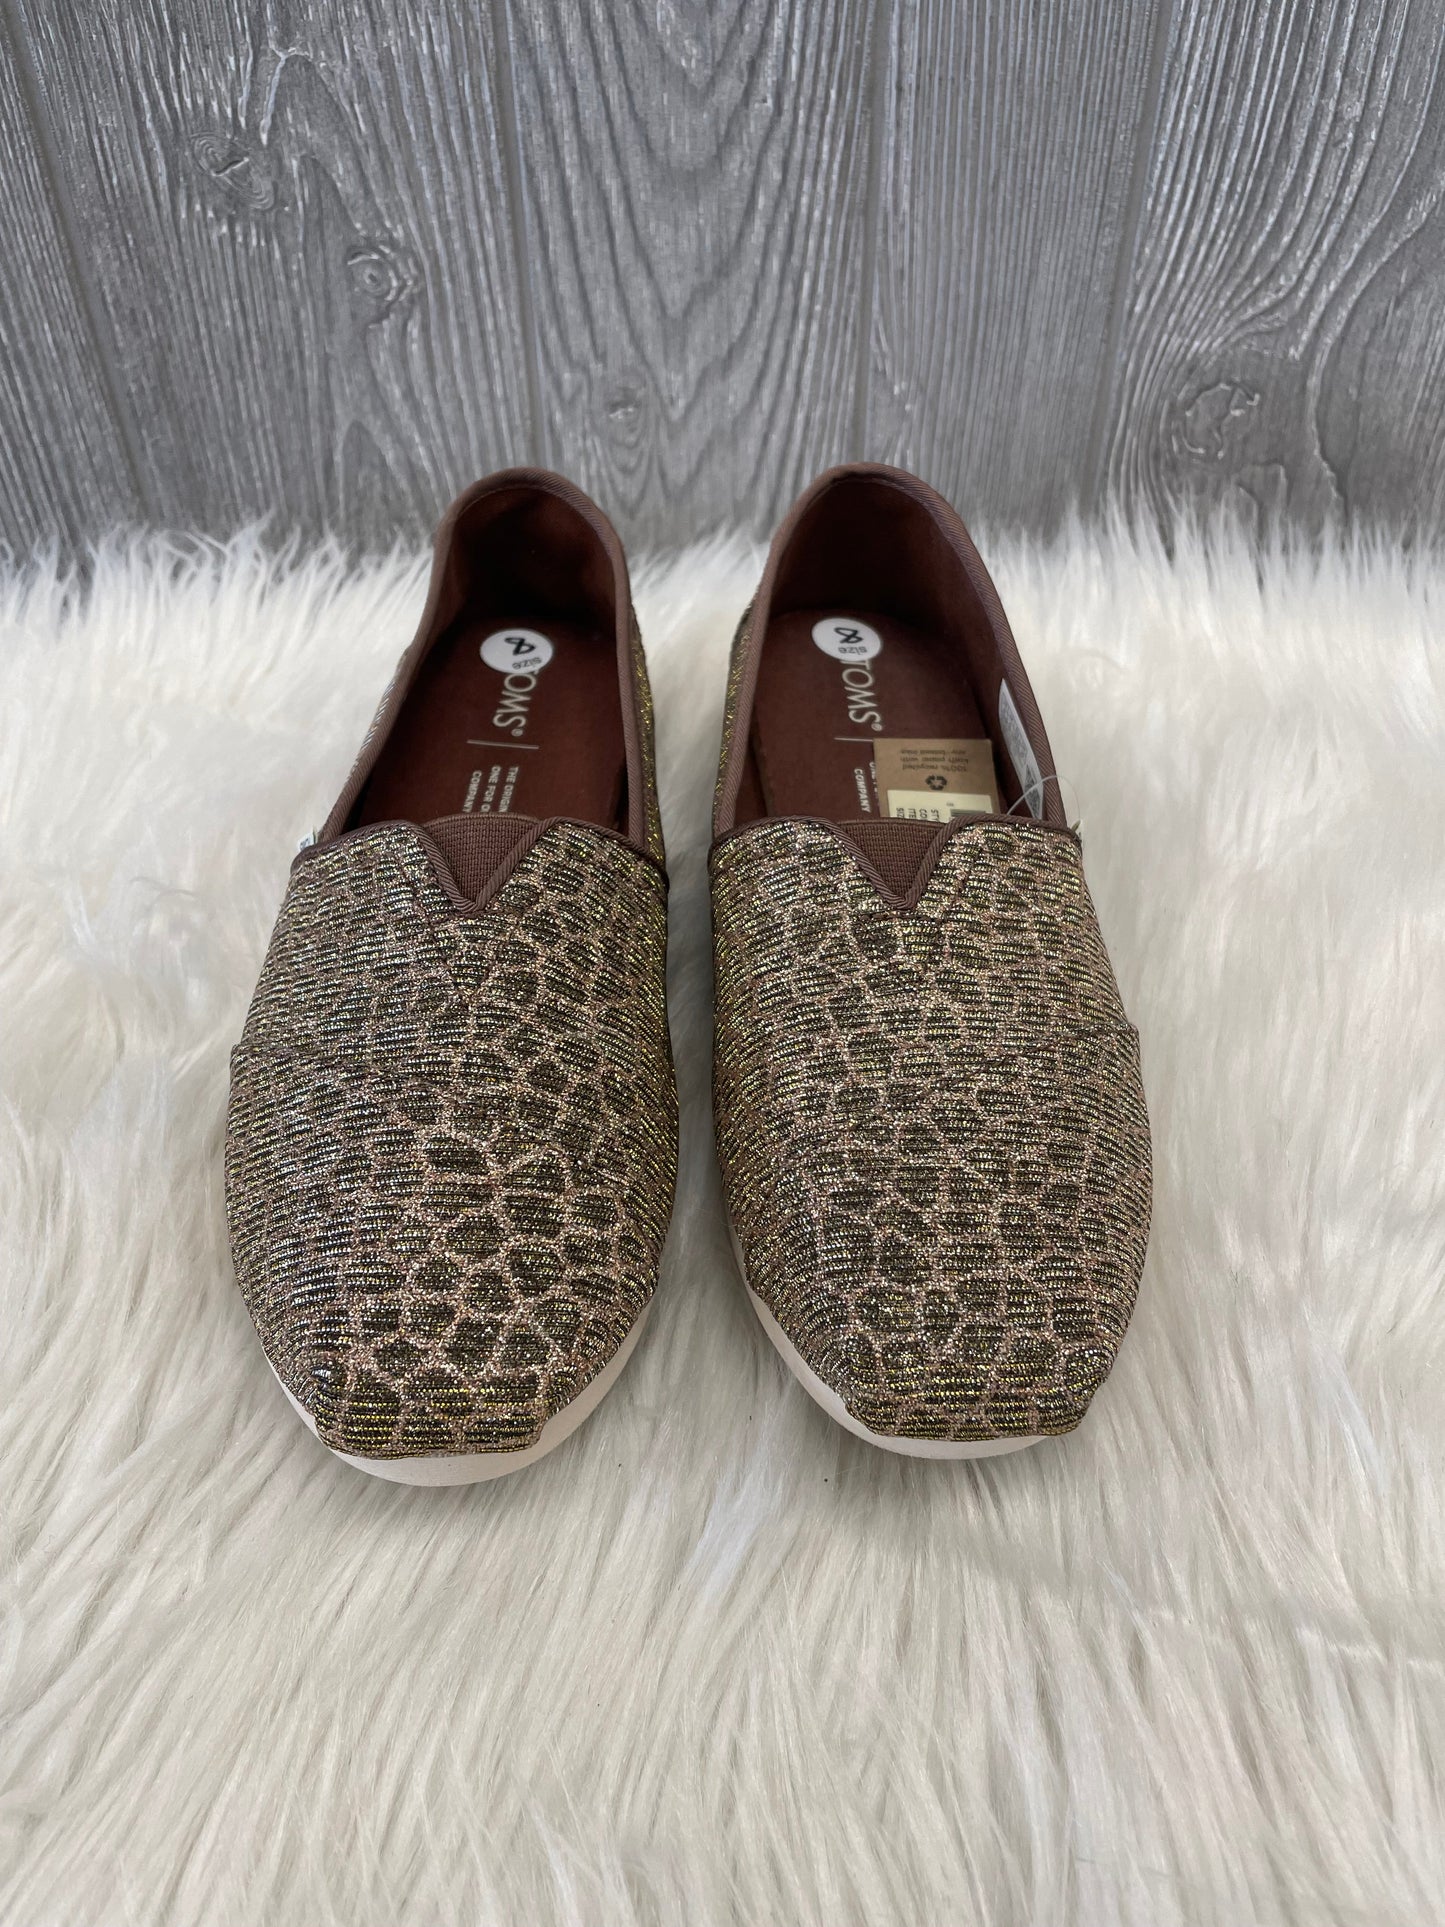 Animal Print Shoes Flats Toms, Size 8